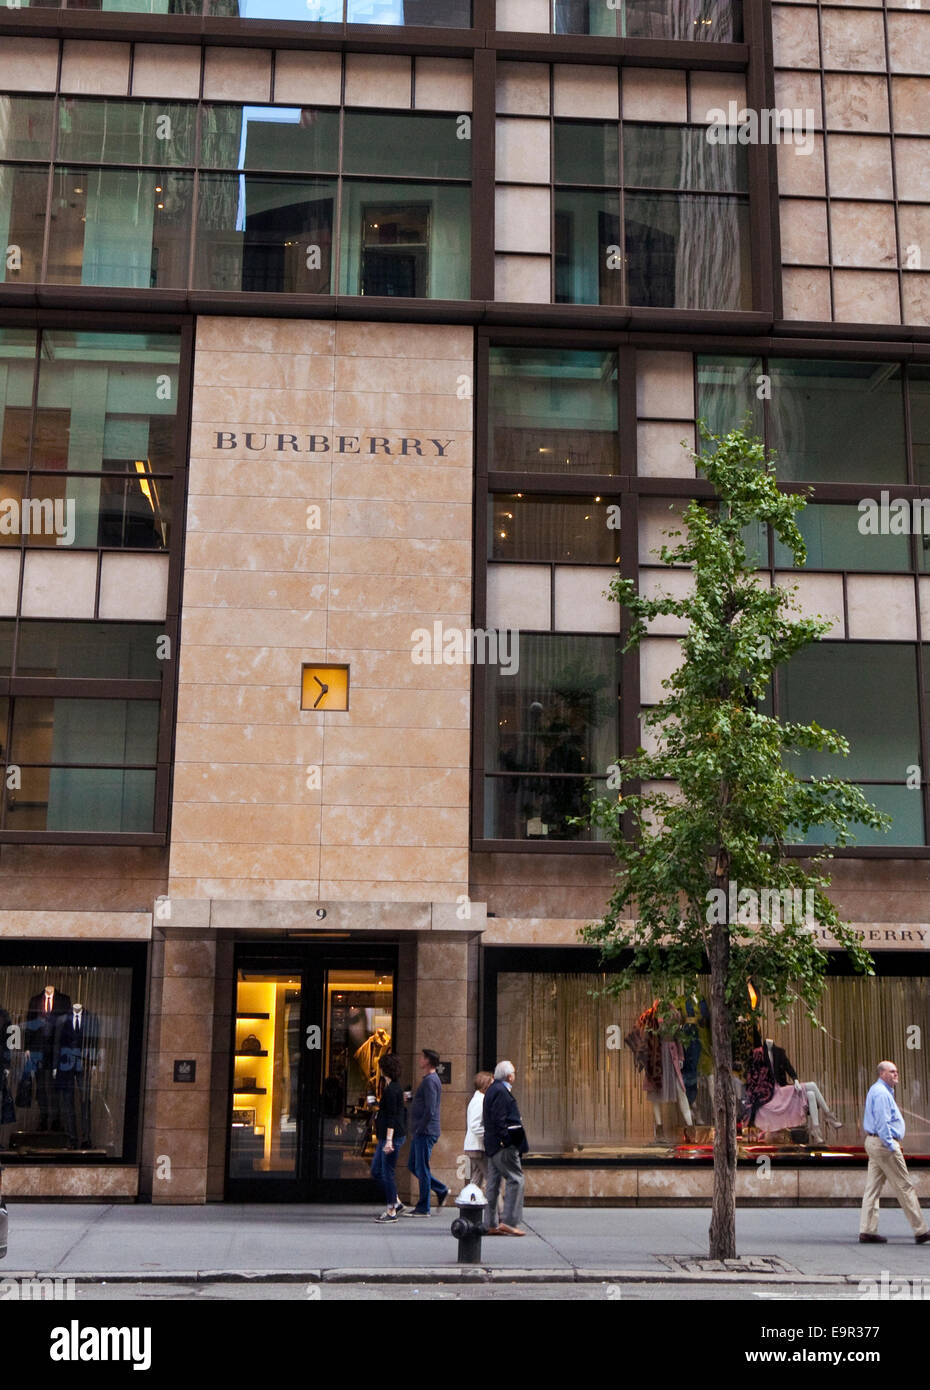 A view of a Burberry store in New York Stock Photo